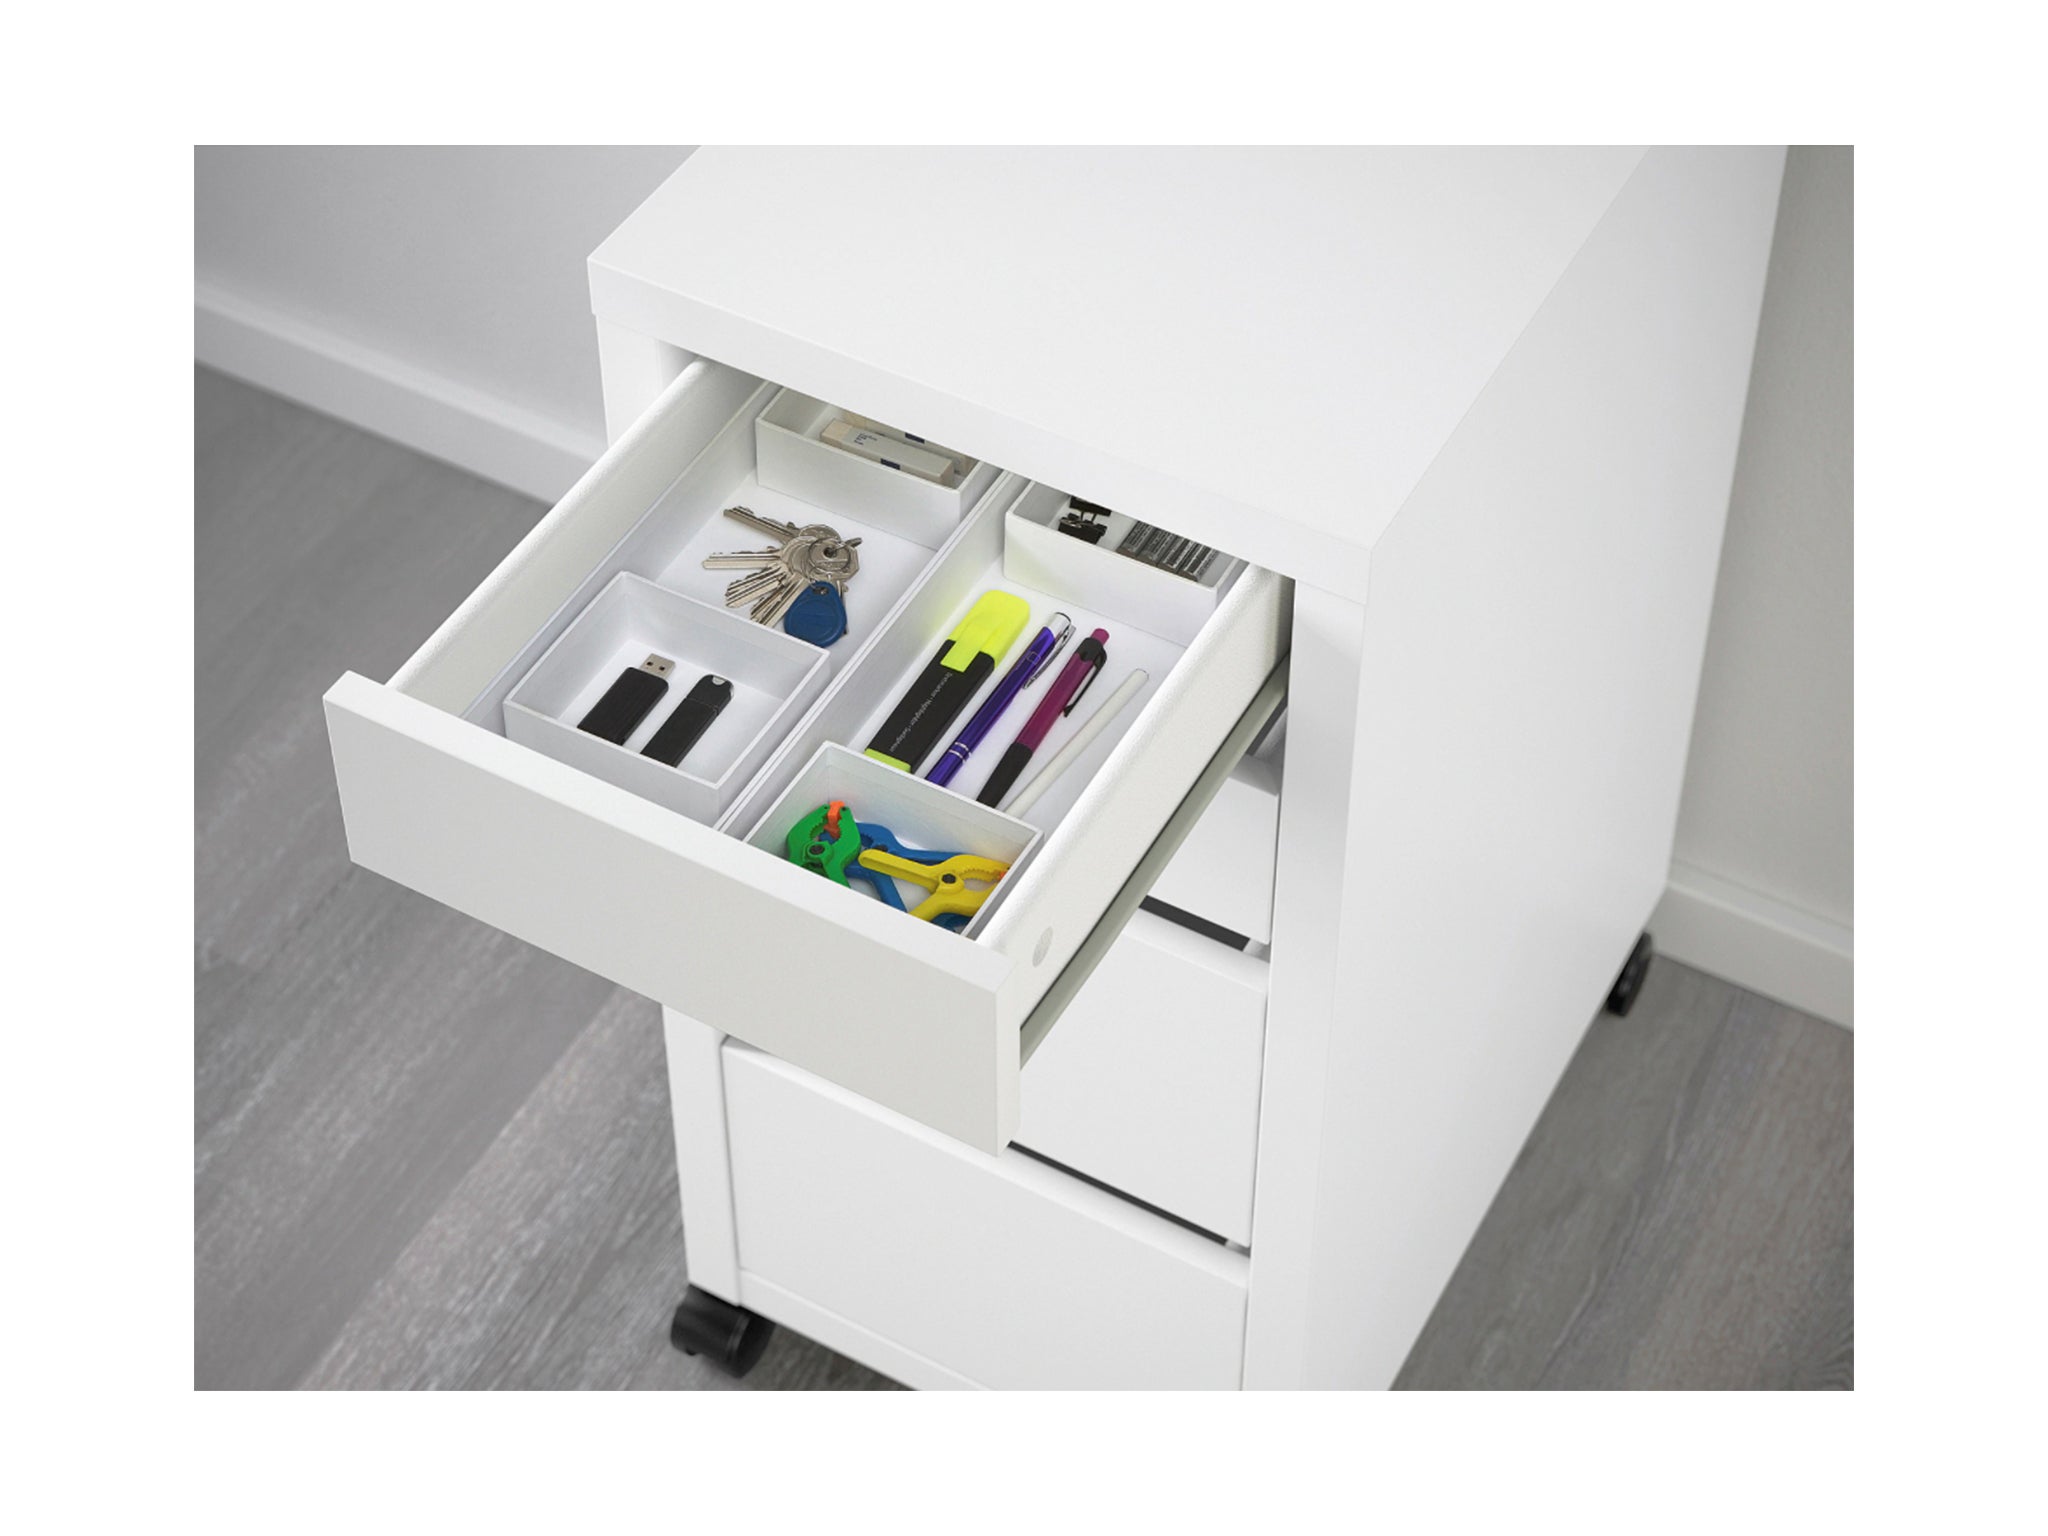 These drawer dividers will be a lifesaver when you're on the hunt for a charger